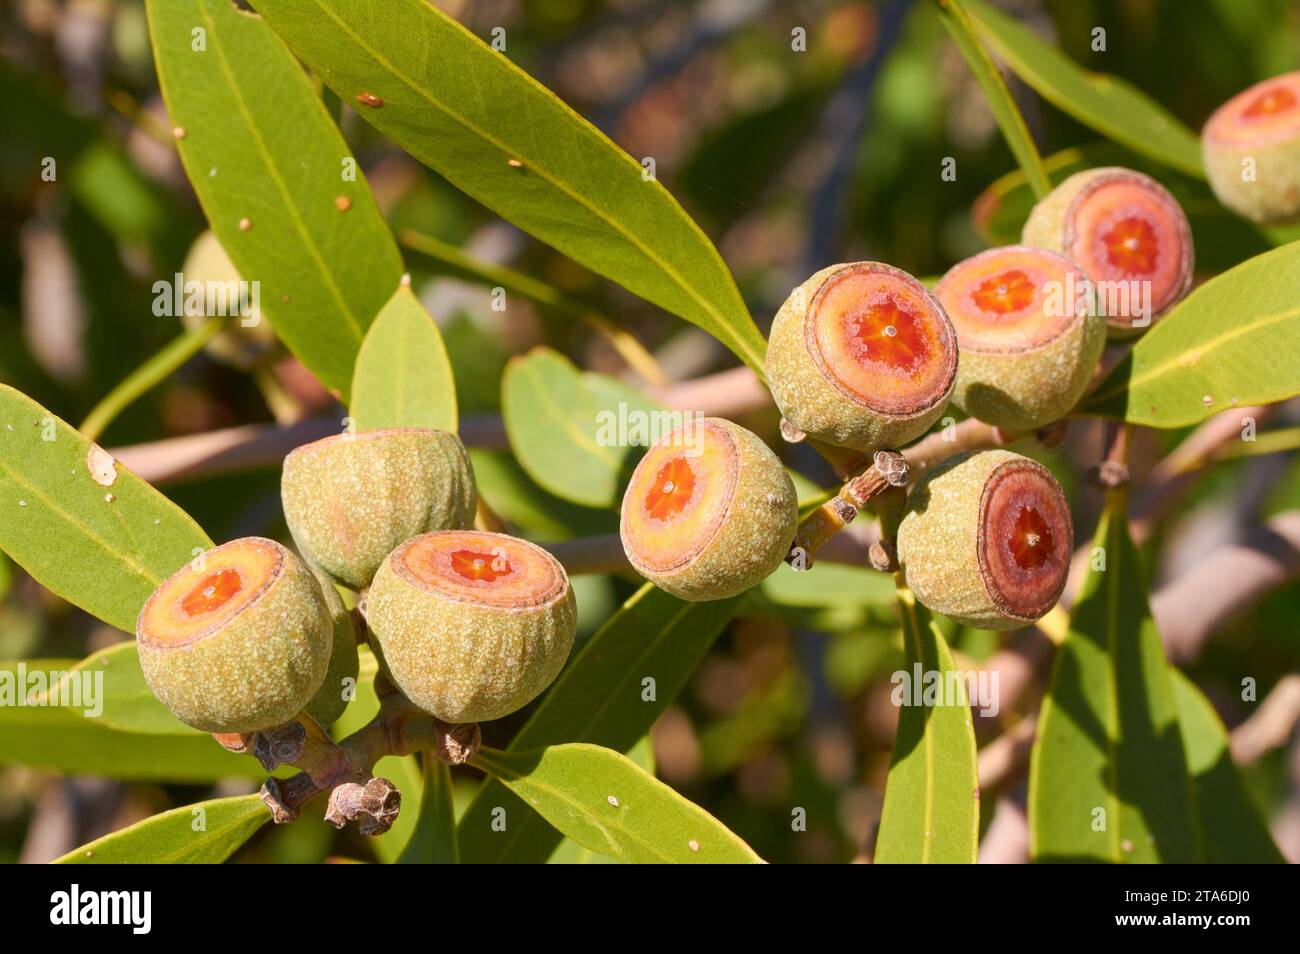 Fruits of the Mount Lesueur Mallee, Eucalyptus suberea, a vulnerable species also known as Cork Mallee, Lesueur National Park, Western Australia. Stock Photo